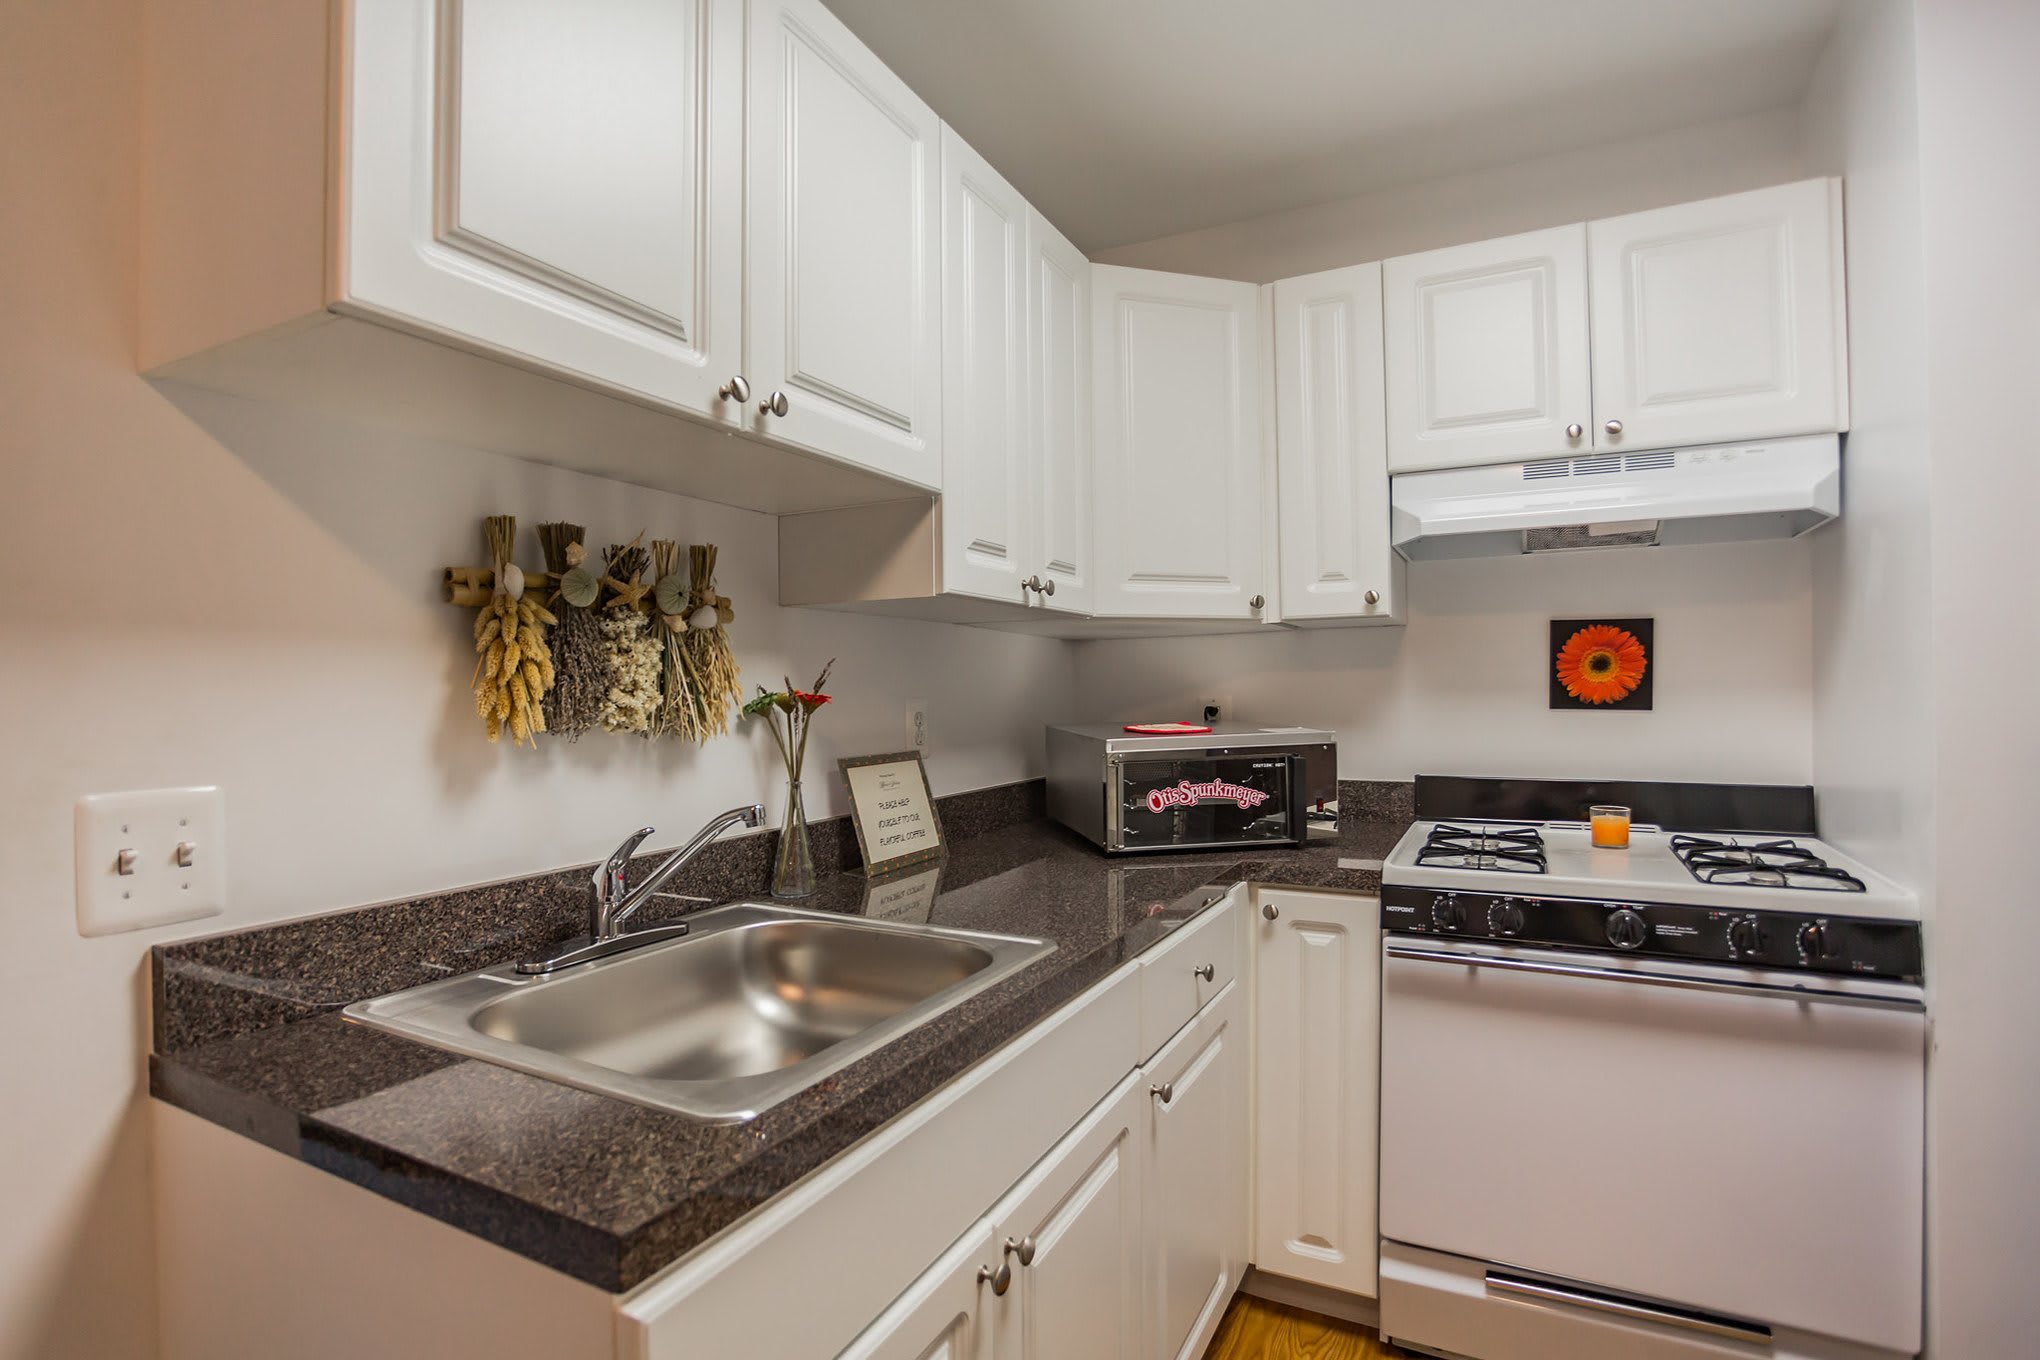 Granite style counter tops in a kitchen at Melrose Station Apartments in Elkins Park, Pennsylvania